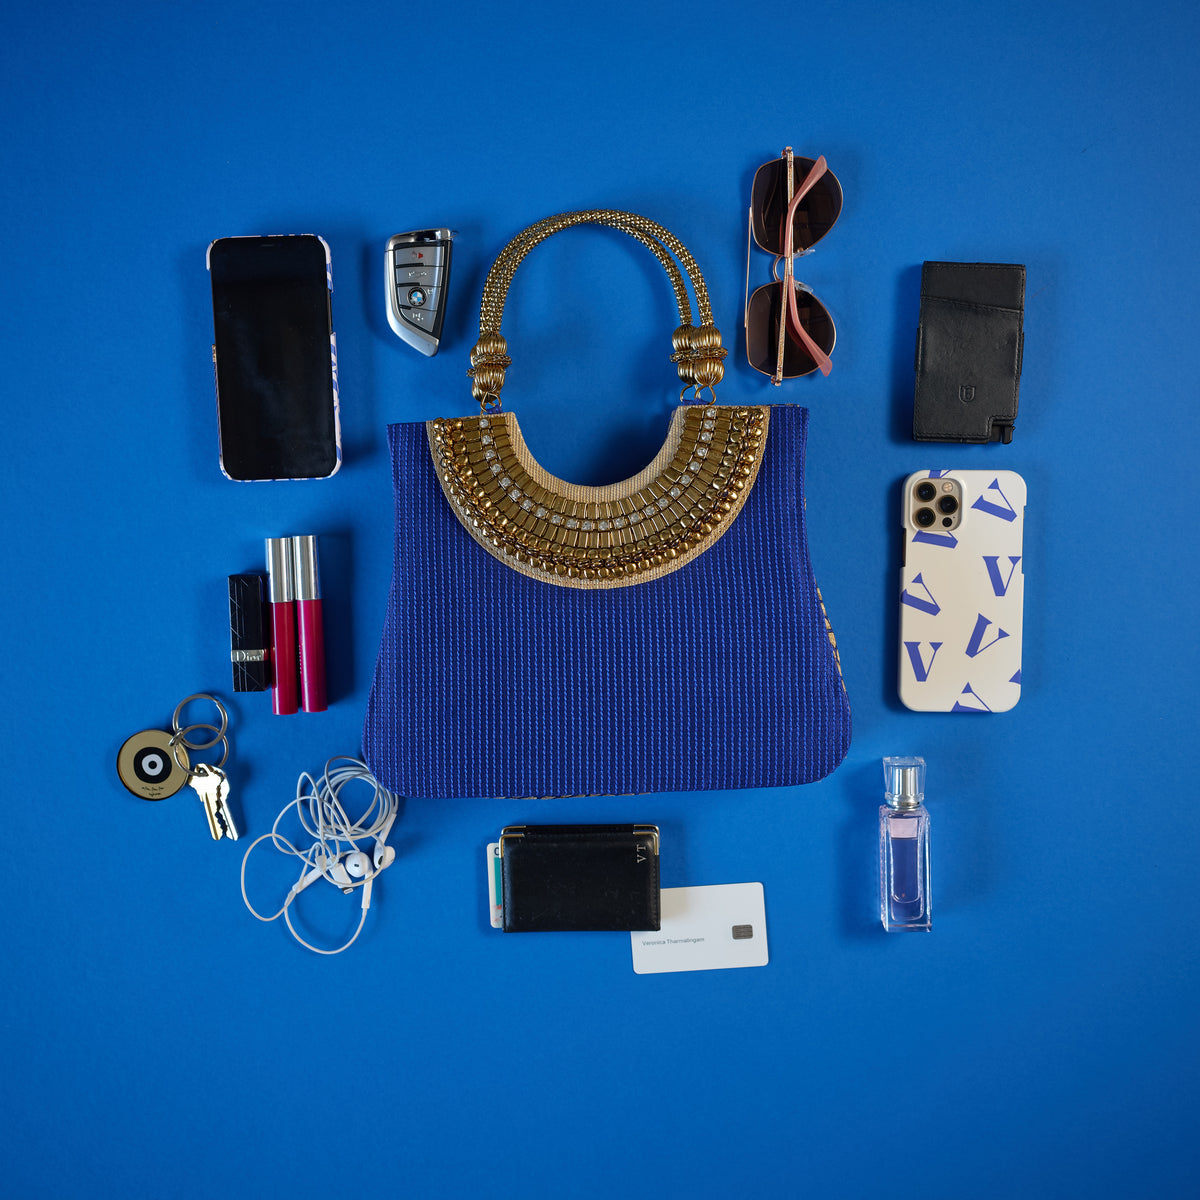 Suriya Mini tote blue and gold with ornate handles. As seen on ramp at NYFW 2021 and editorials. Almost everything fits. Sunglasses, Phone, card holders,  make-up, keys, perfume